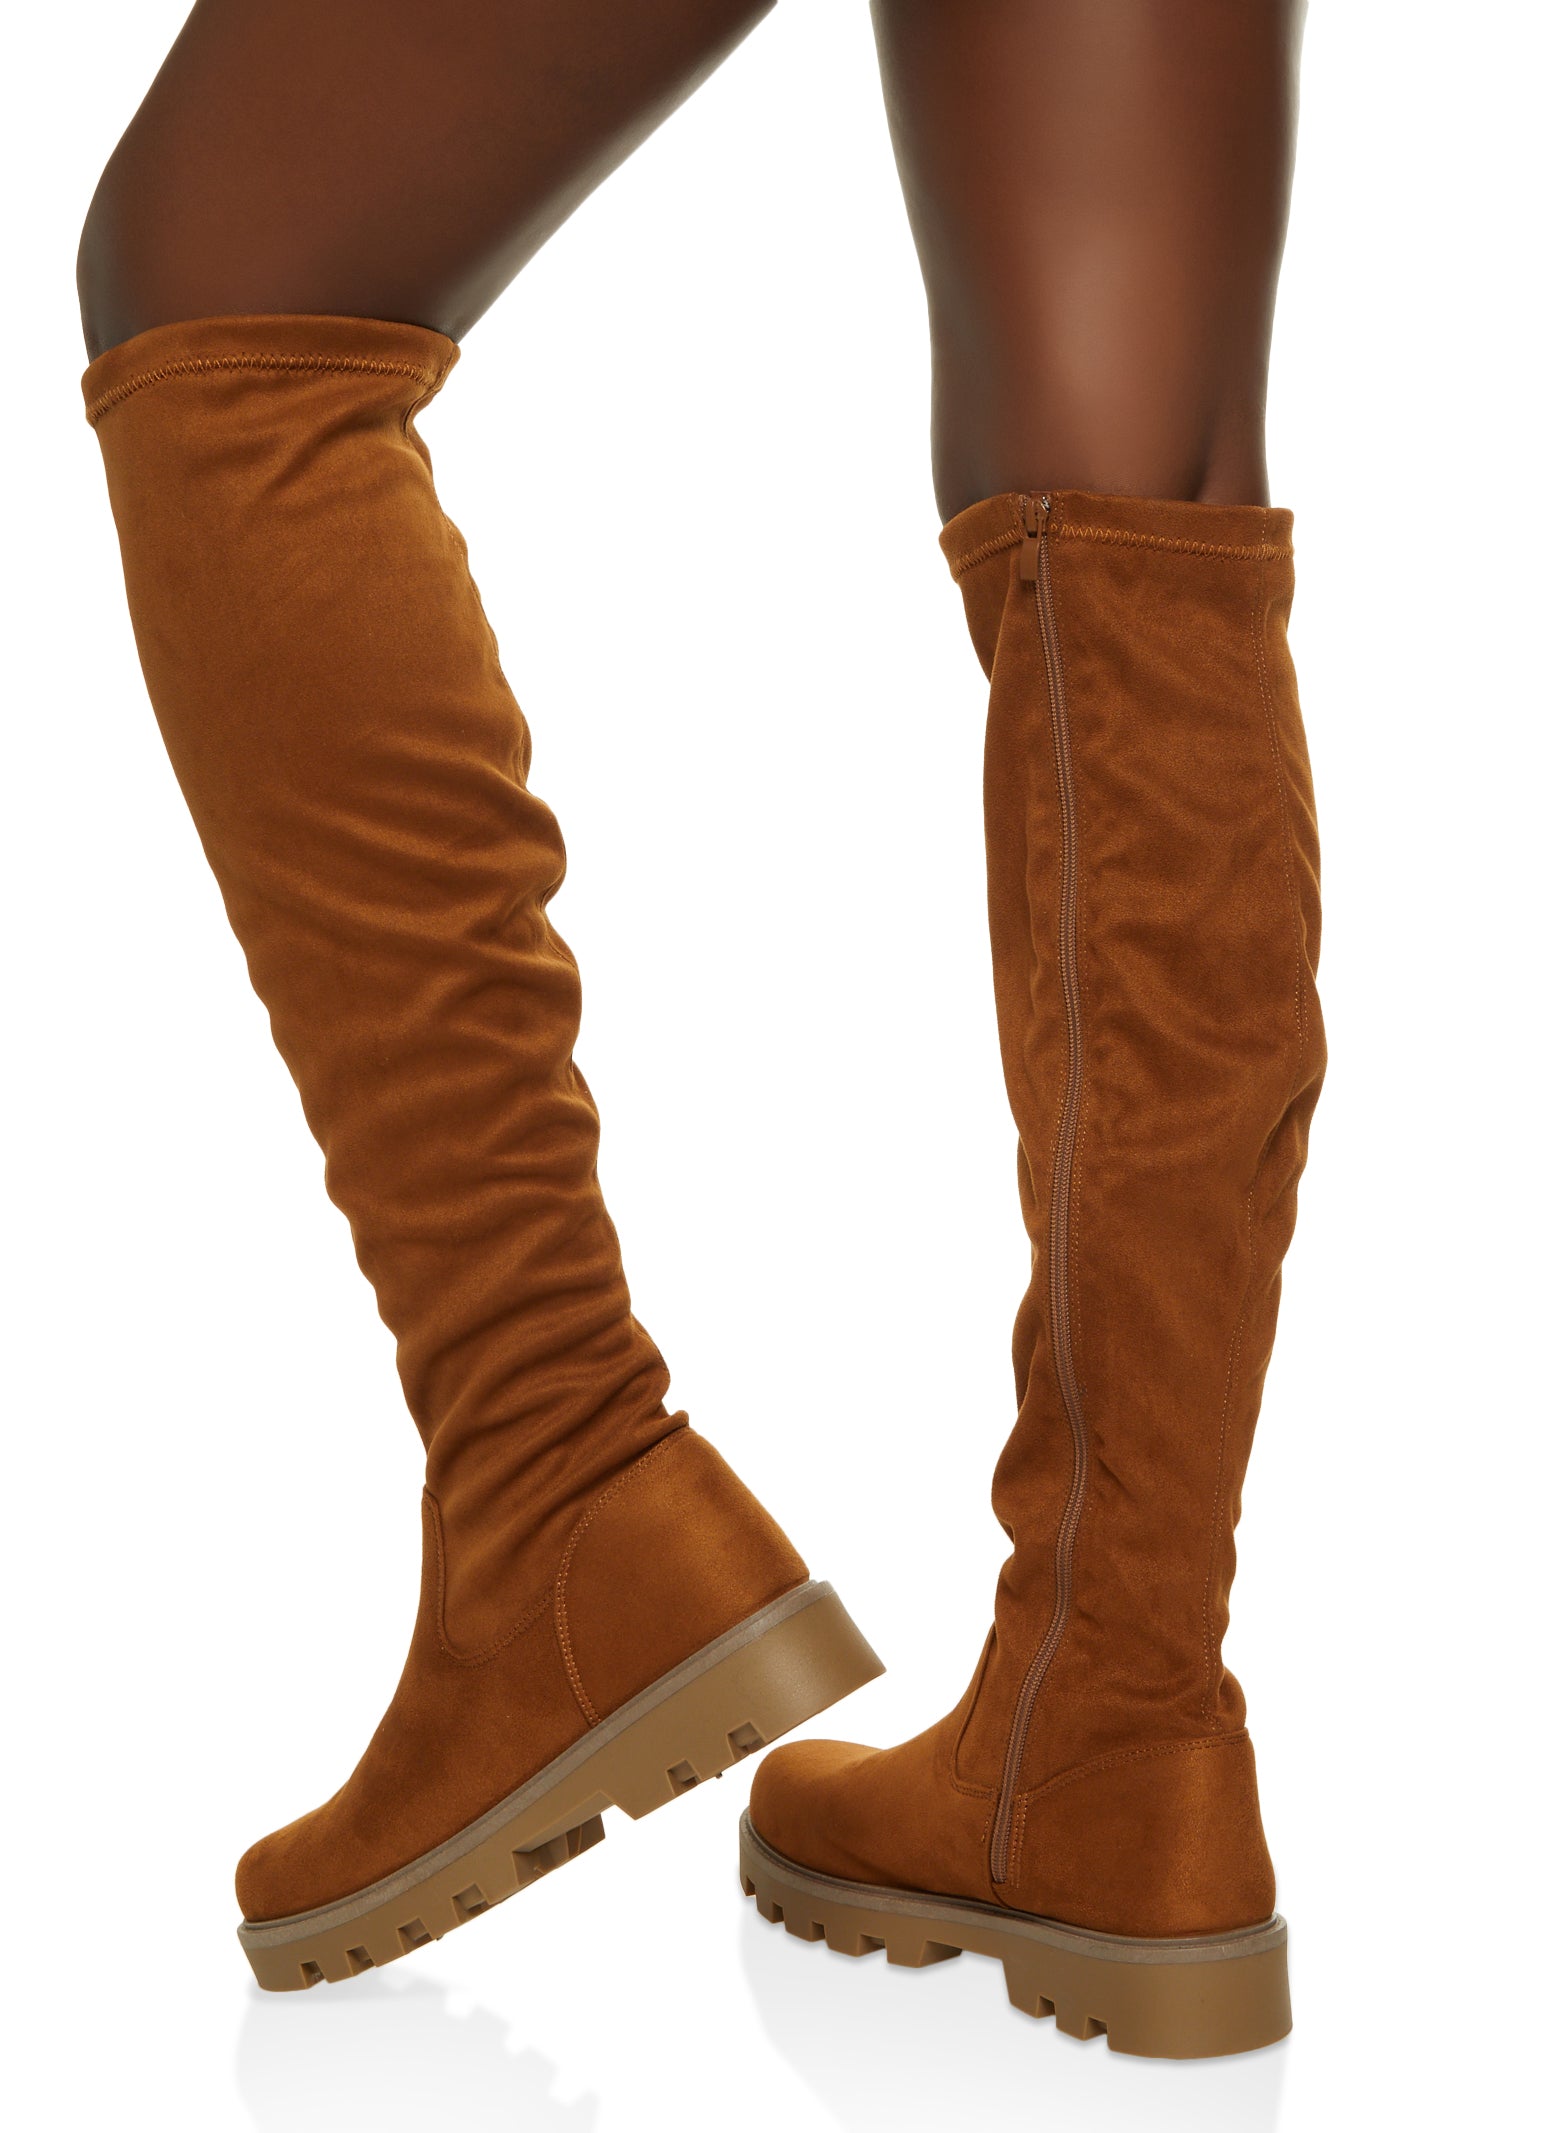 Womens Lug Sole Knee High Boots, Brown, Size 10